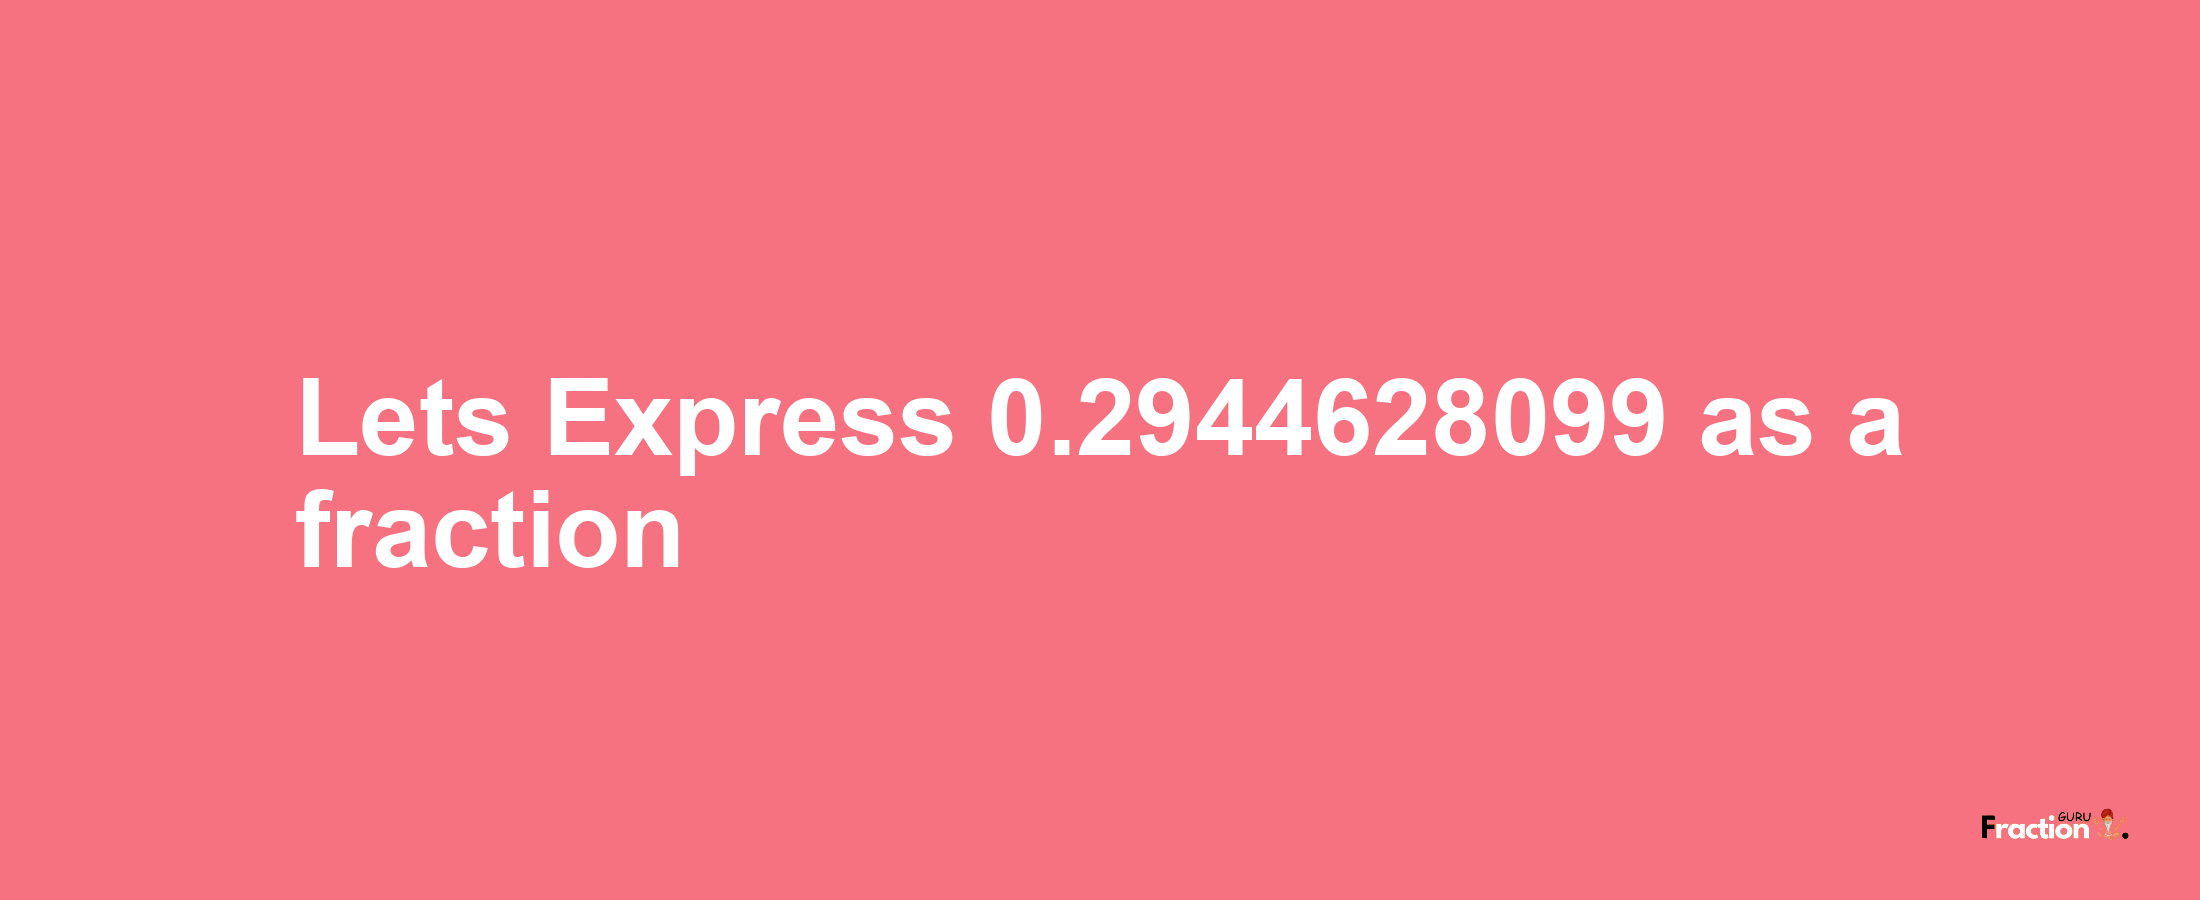 Lets Express 0.2944628099 as afraction